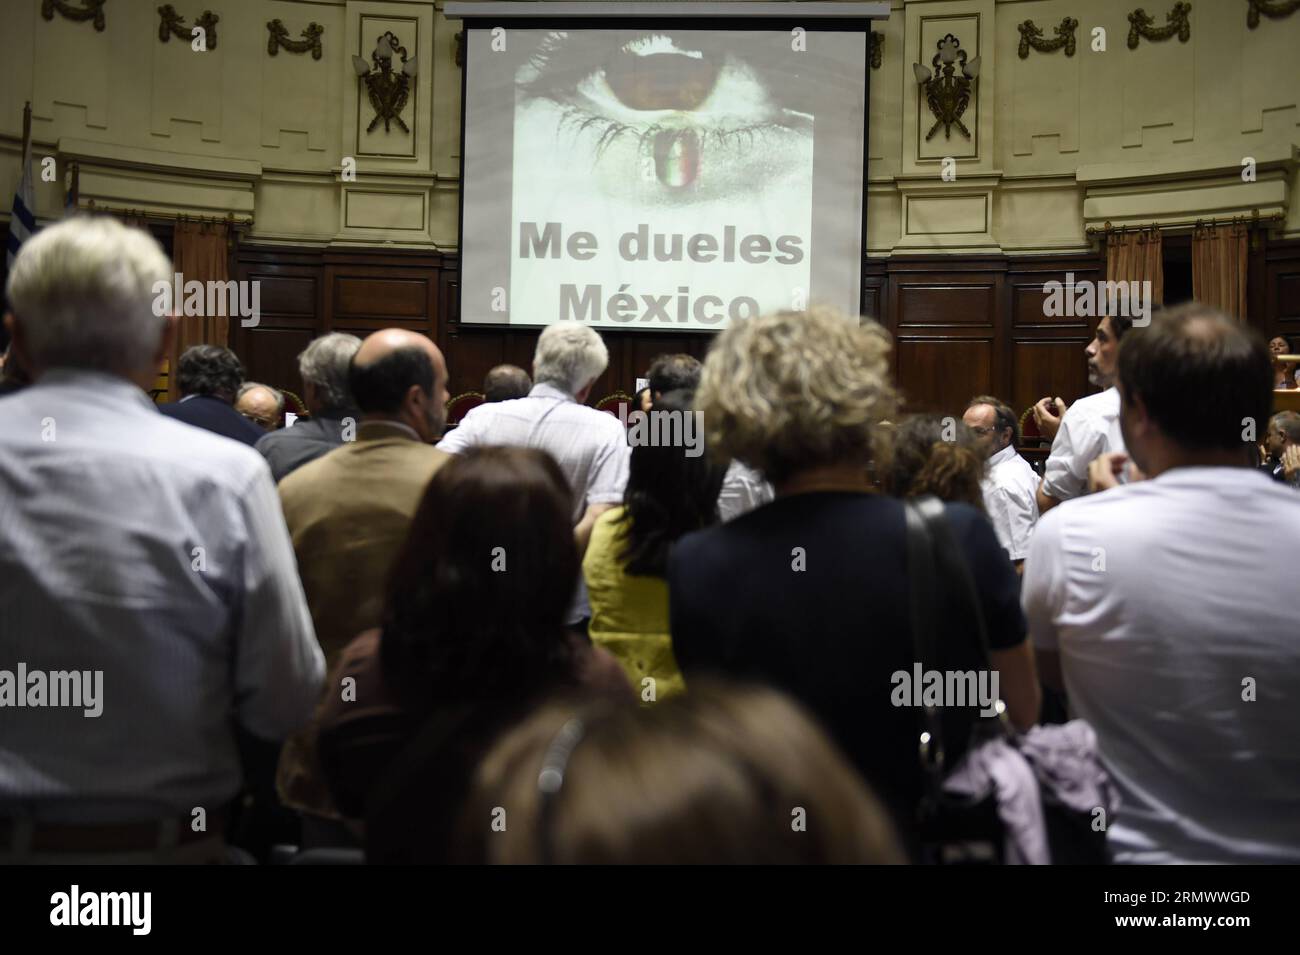 (141112) -- MONTEVIDEO, Nov. 12, 2014 -- People take part during an act to support the family members of the 43 students of the Normal Rural School of Ayotzinapa, that went missing in Iguala, Guerrero, organized by the Uruguayan Networks in Solidarity with the Mexican People, in the Auditorium of the University of the Republic of Uruguay, in Montevideo, capital of Uruguay, on Nov. 11, 2014. Nicolas Celaya) URUGUAY-MONTEVIDEO-MEXICO-SOCIETY-RALLY e NICOLASxCELAYA PUBLICATIONxNOTxINxCHN   Montevideo Nov 12 2014 Celebrities Take Part during to ACT to Support The Family Members of The 43 Students Stock Photo